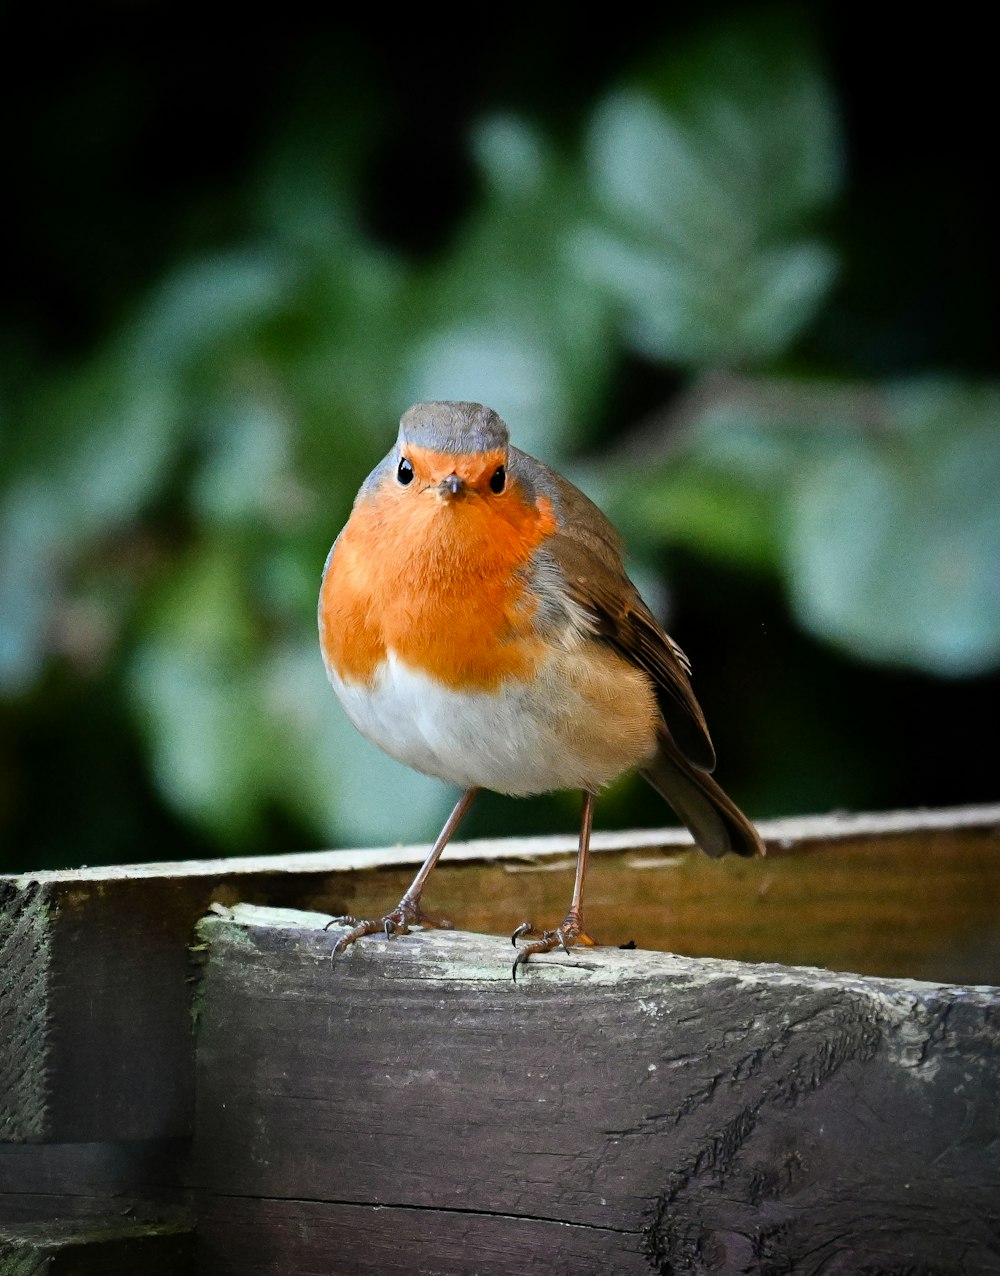 a small bird perched on a wooden ledge